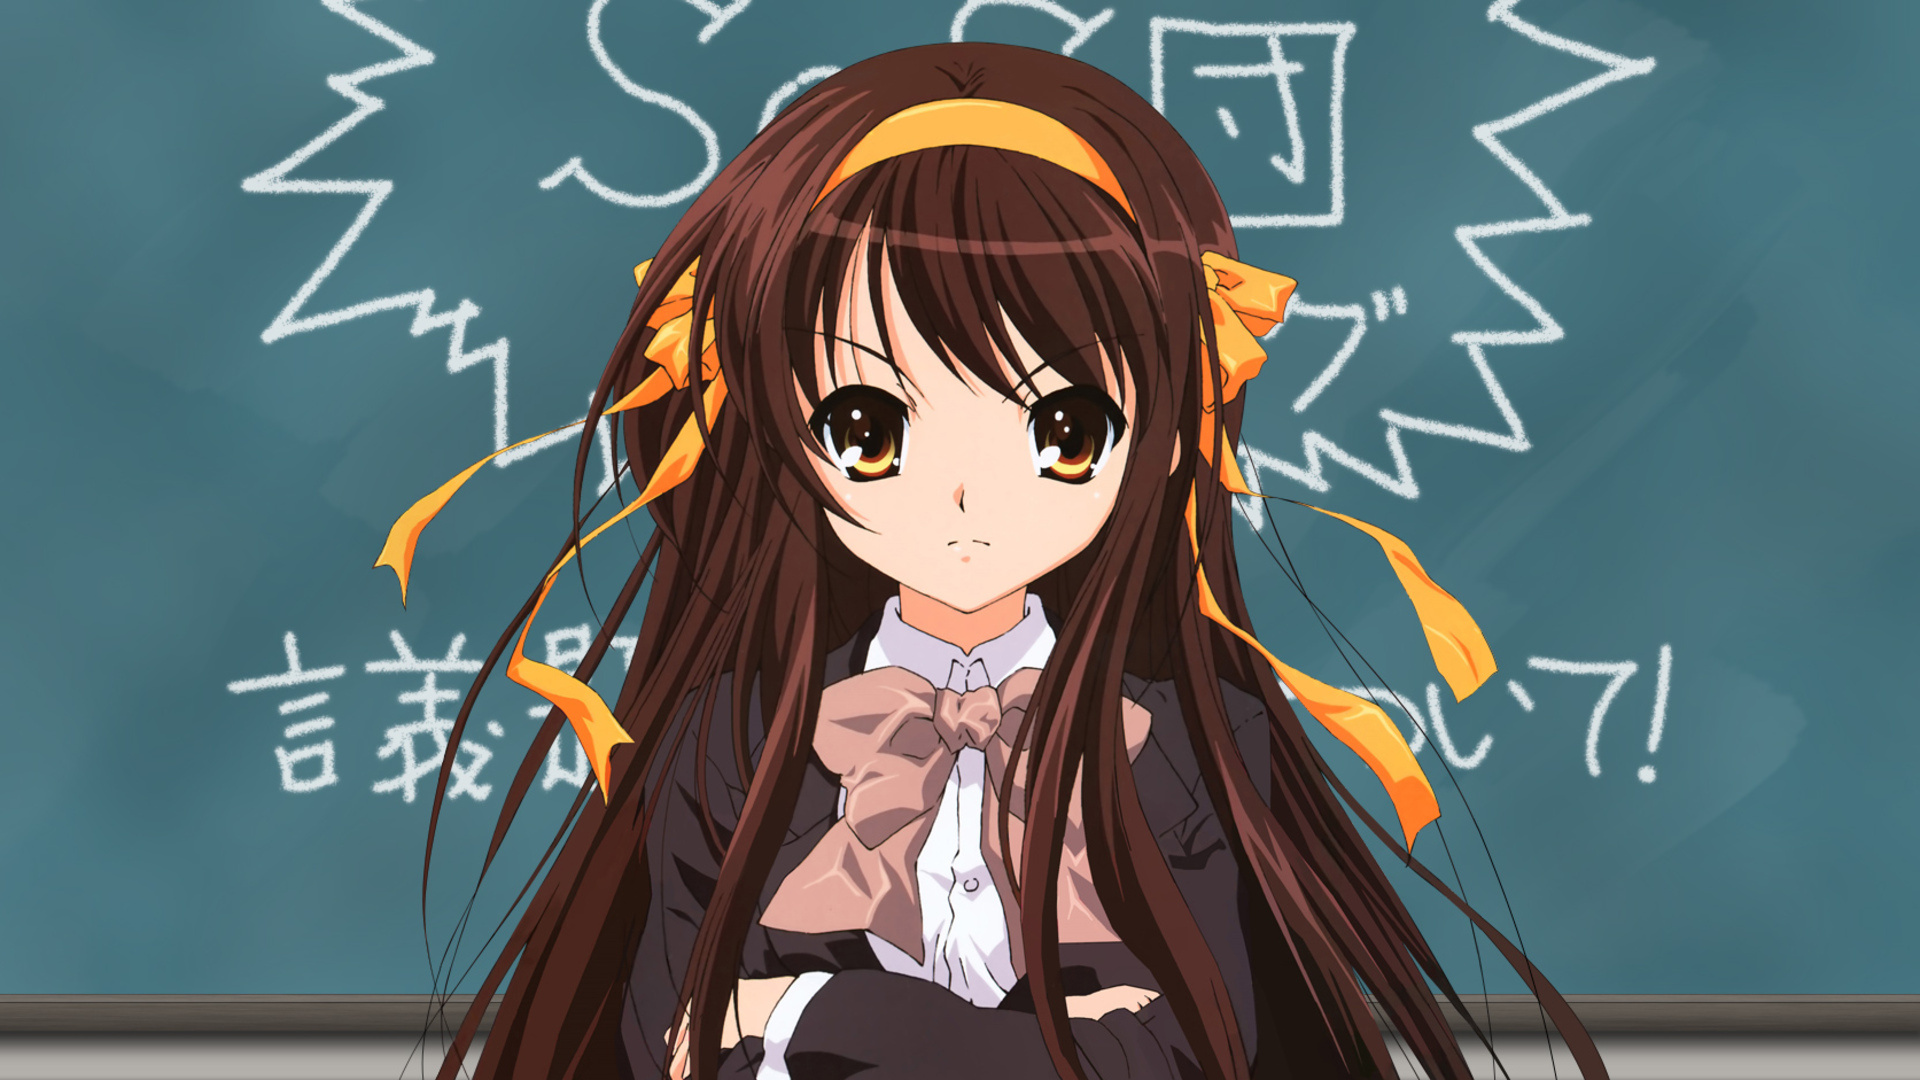 The Melancholy of Haruhi Suzumiya, HD wallpapers and backgrounds, 1920x1080 Full HD Desktop